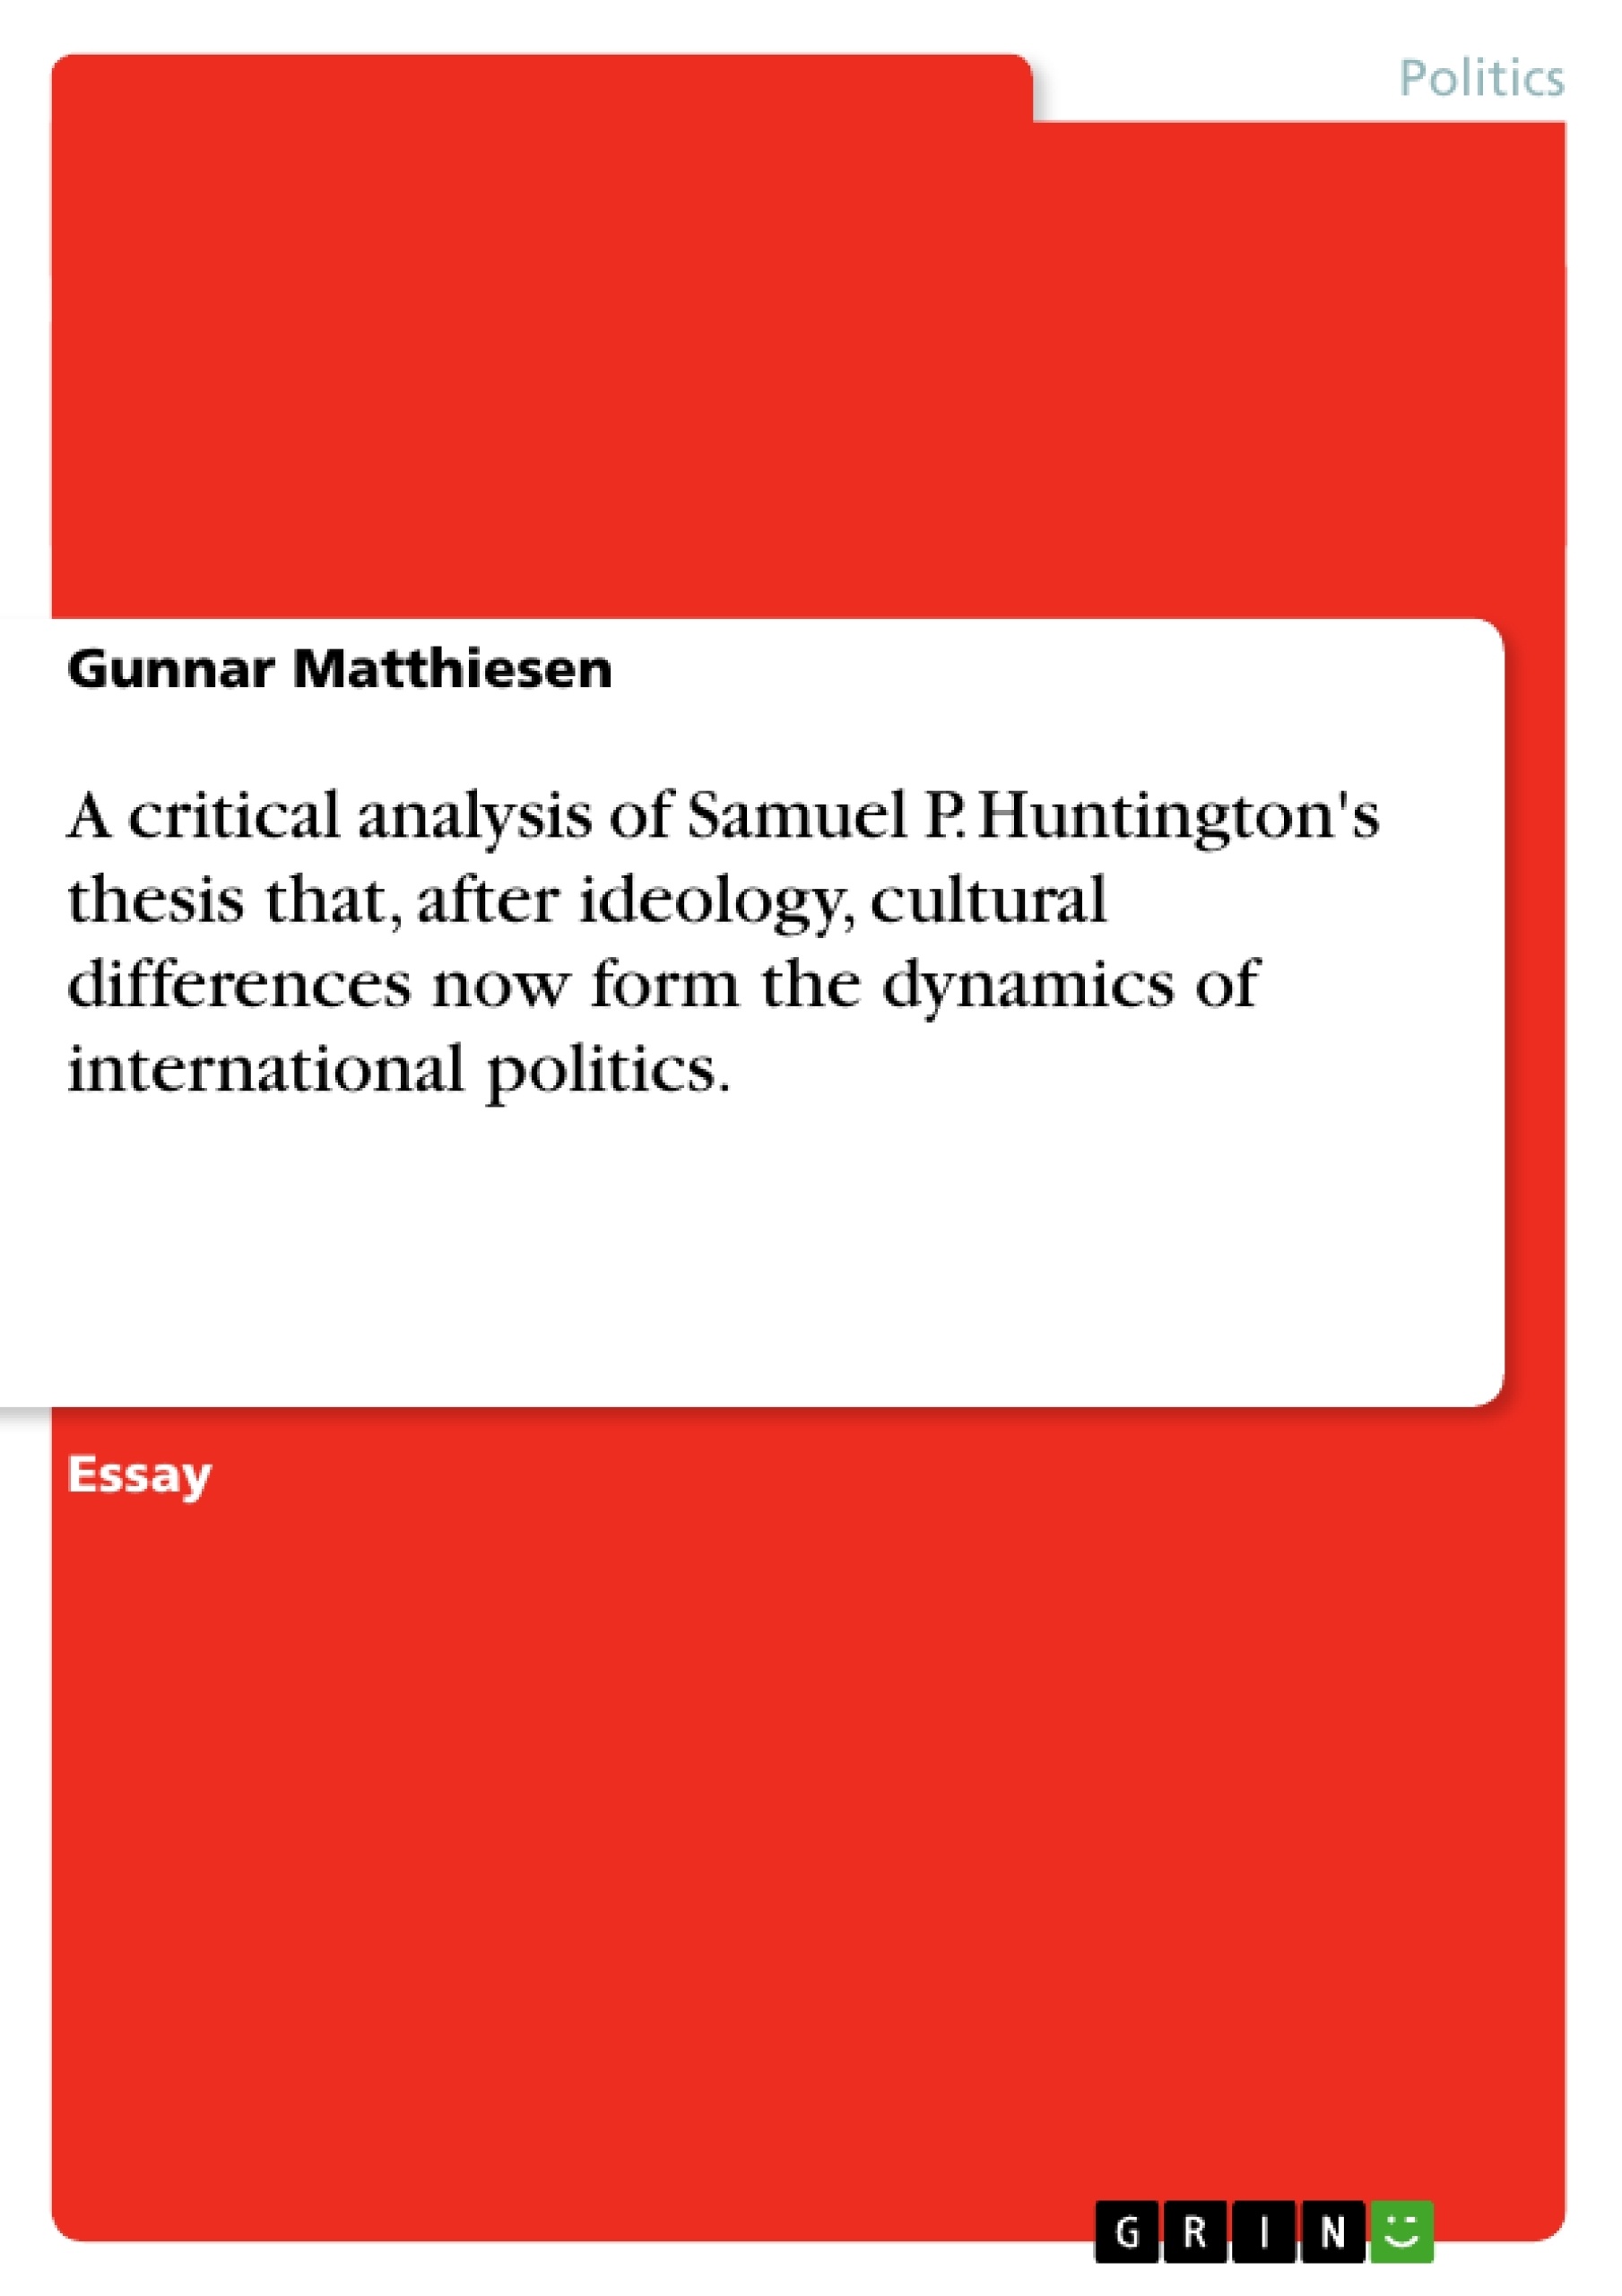 Titre: A critical analysis of Samuel P. Huntington's thesis that, after ideology, cultural differences now form the dynamics of international politics.